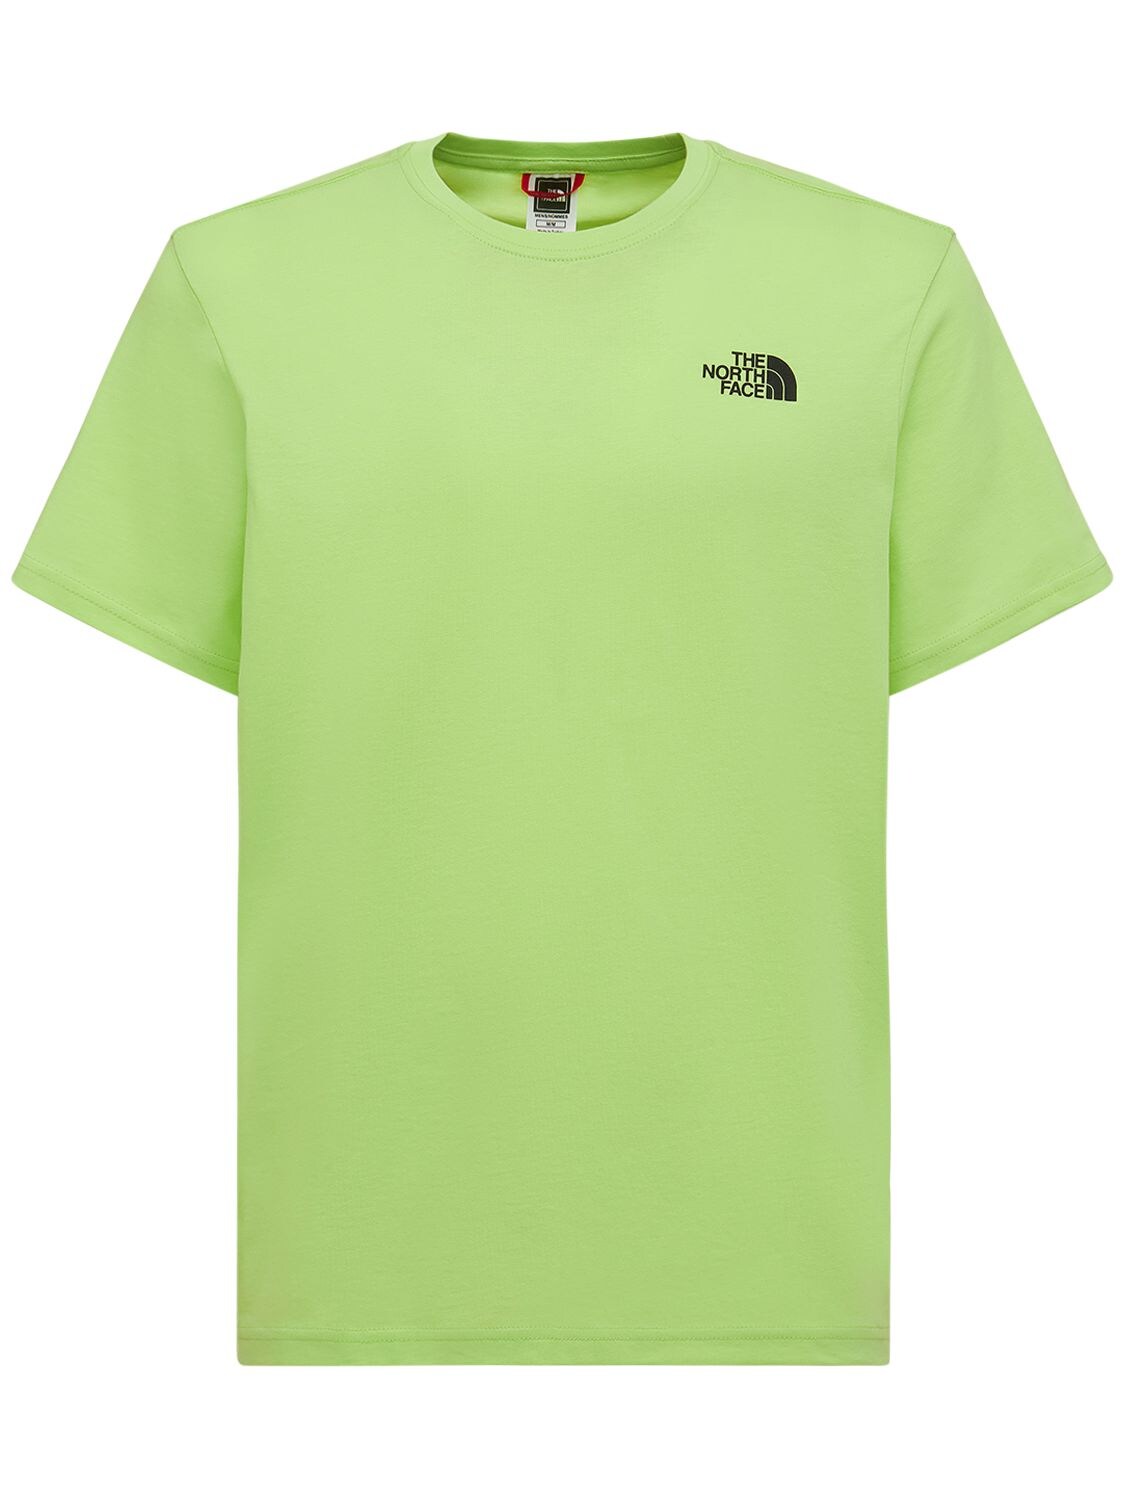 The North Face Red Box Logo Cotton T-shirt In Sharp Green